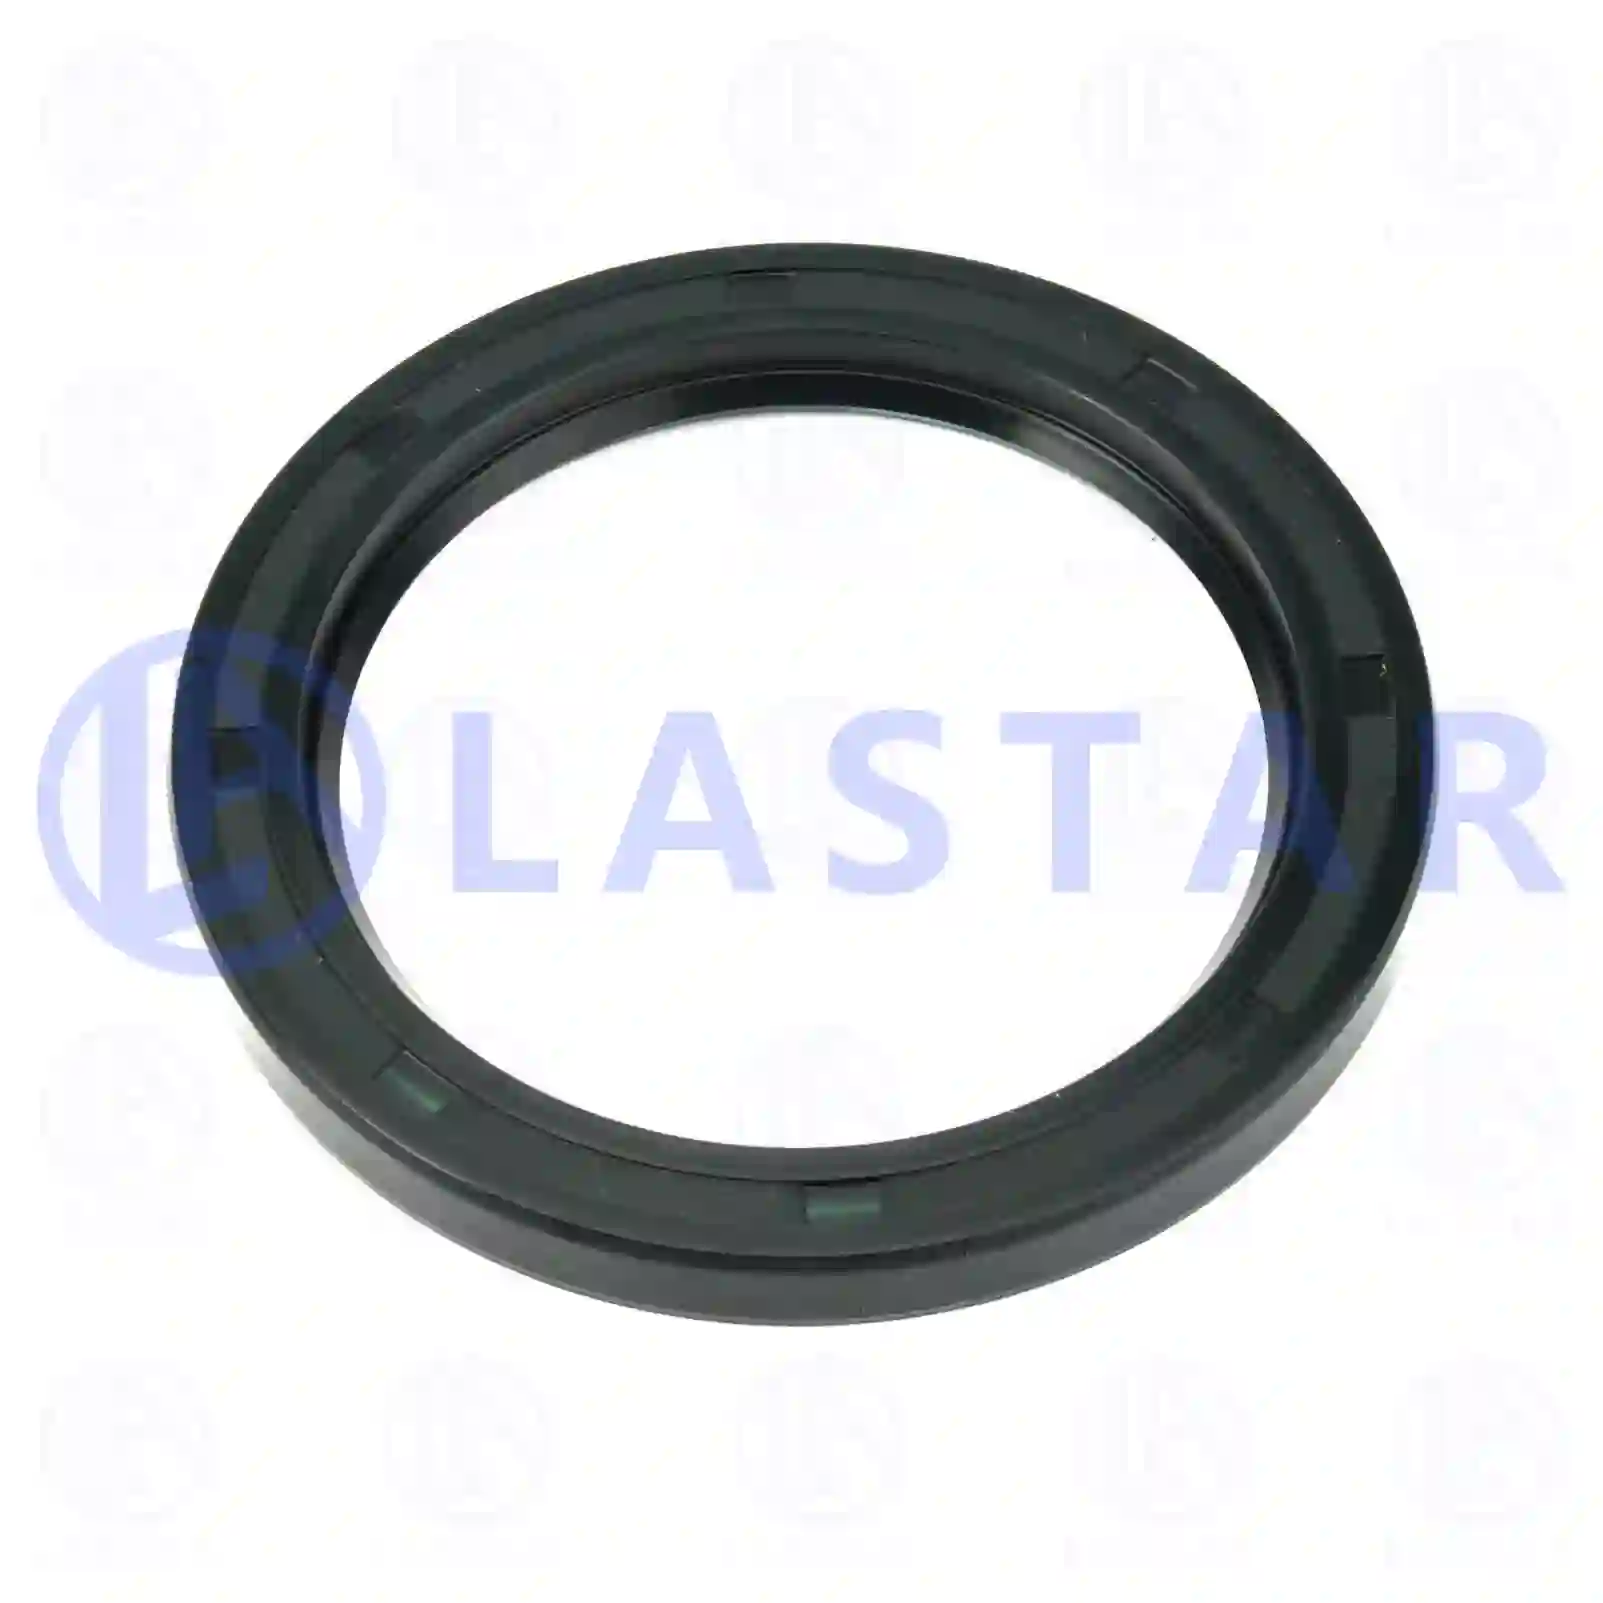 Oil seal, 77726058, 38510549, 38510549, 0049971347, 33352 ||  77726058 Lastar Spare Part | Truck Spare Parts, Auotomotive Spare Parts Oil seal, 77726058, 38510549, 38510549, 0049971347, 33352 ||  77726058 Lastar Spare Part | Truck Spare Parts, Auotomotive Spare Parts